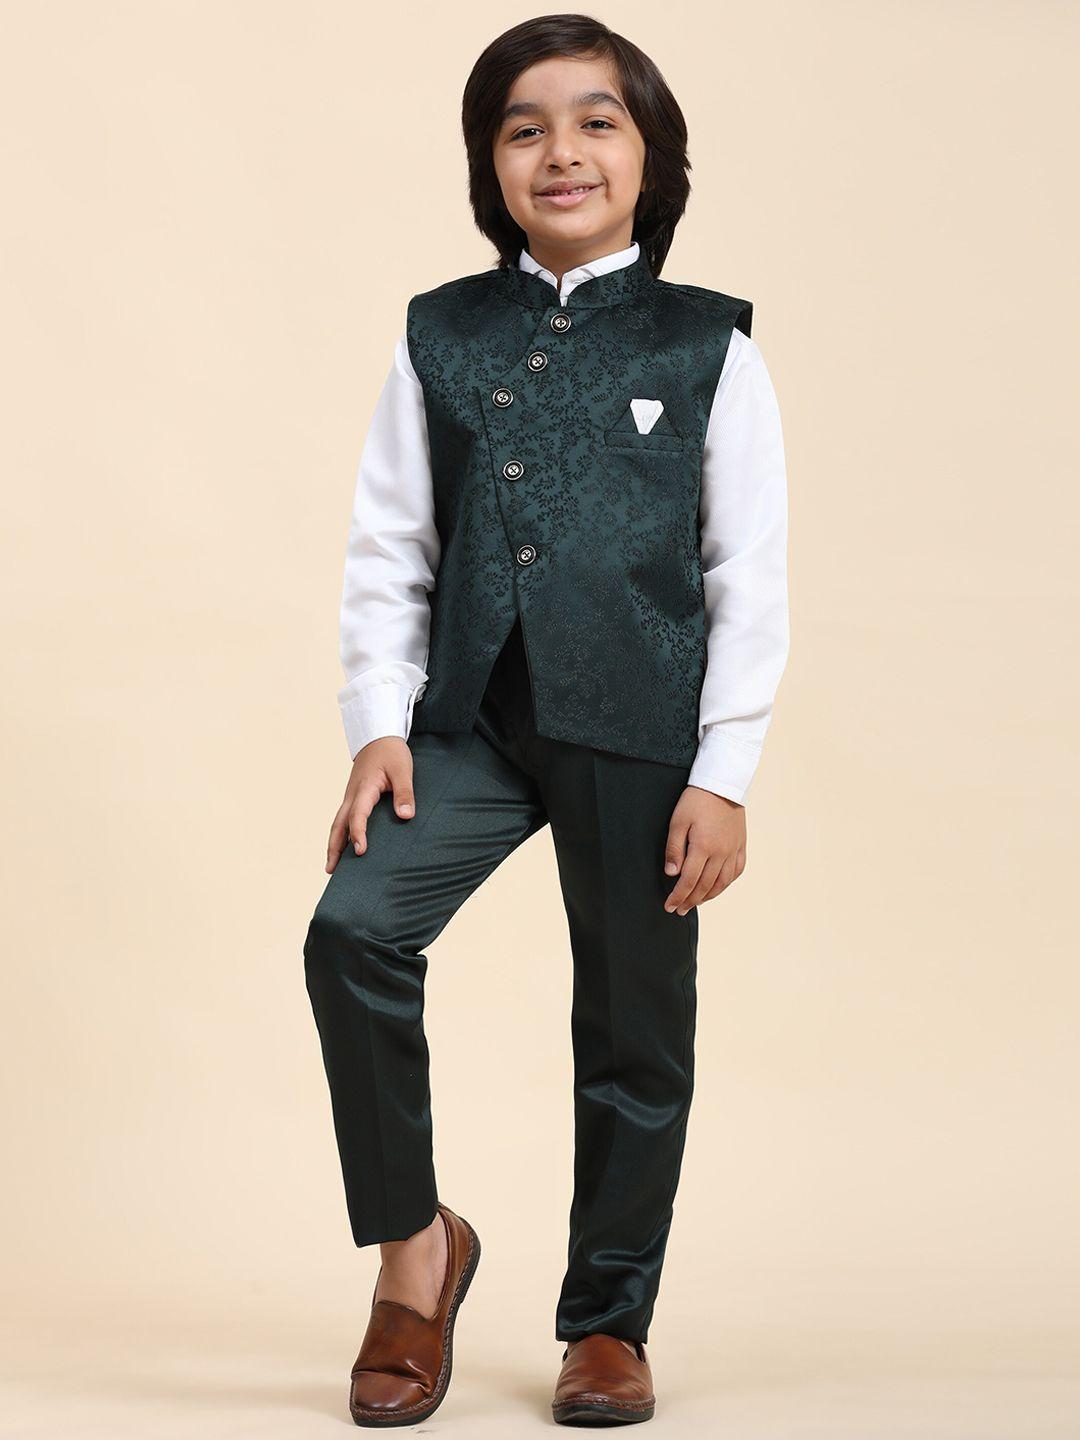 pro-ethic style developer boys self design single-breasted 3-piece party suit